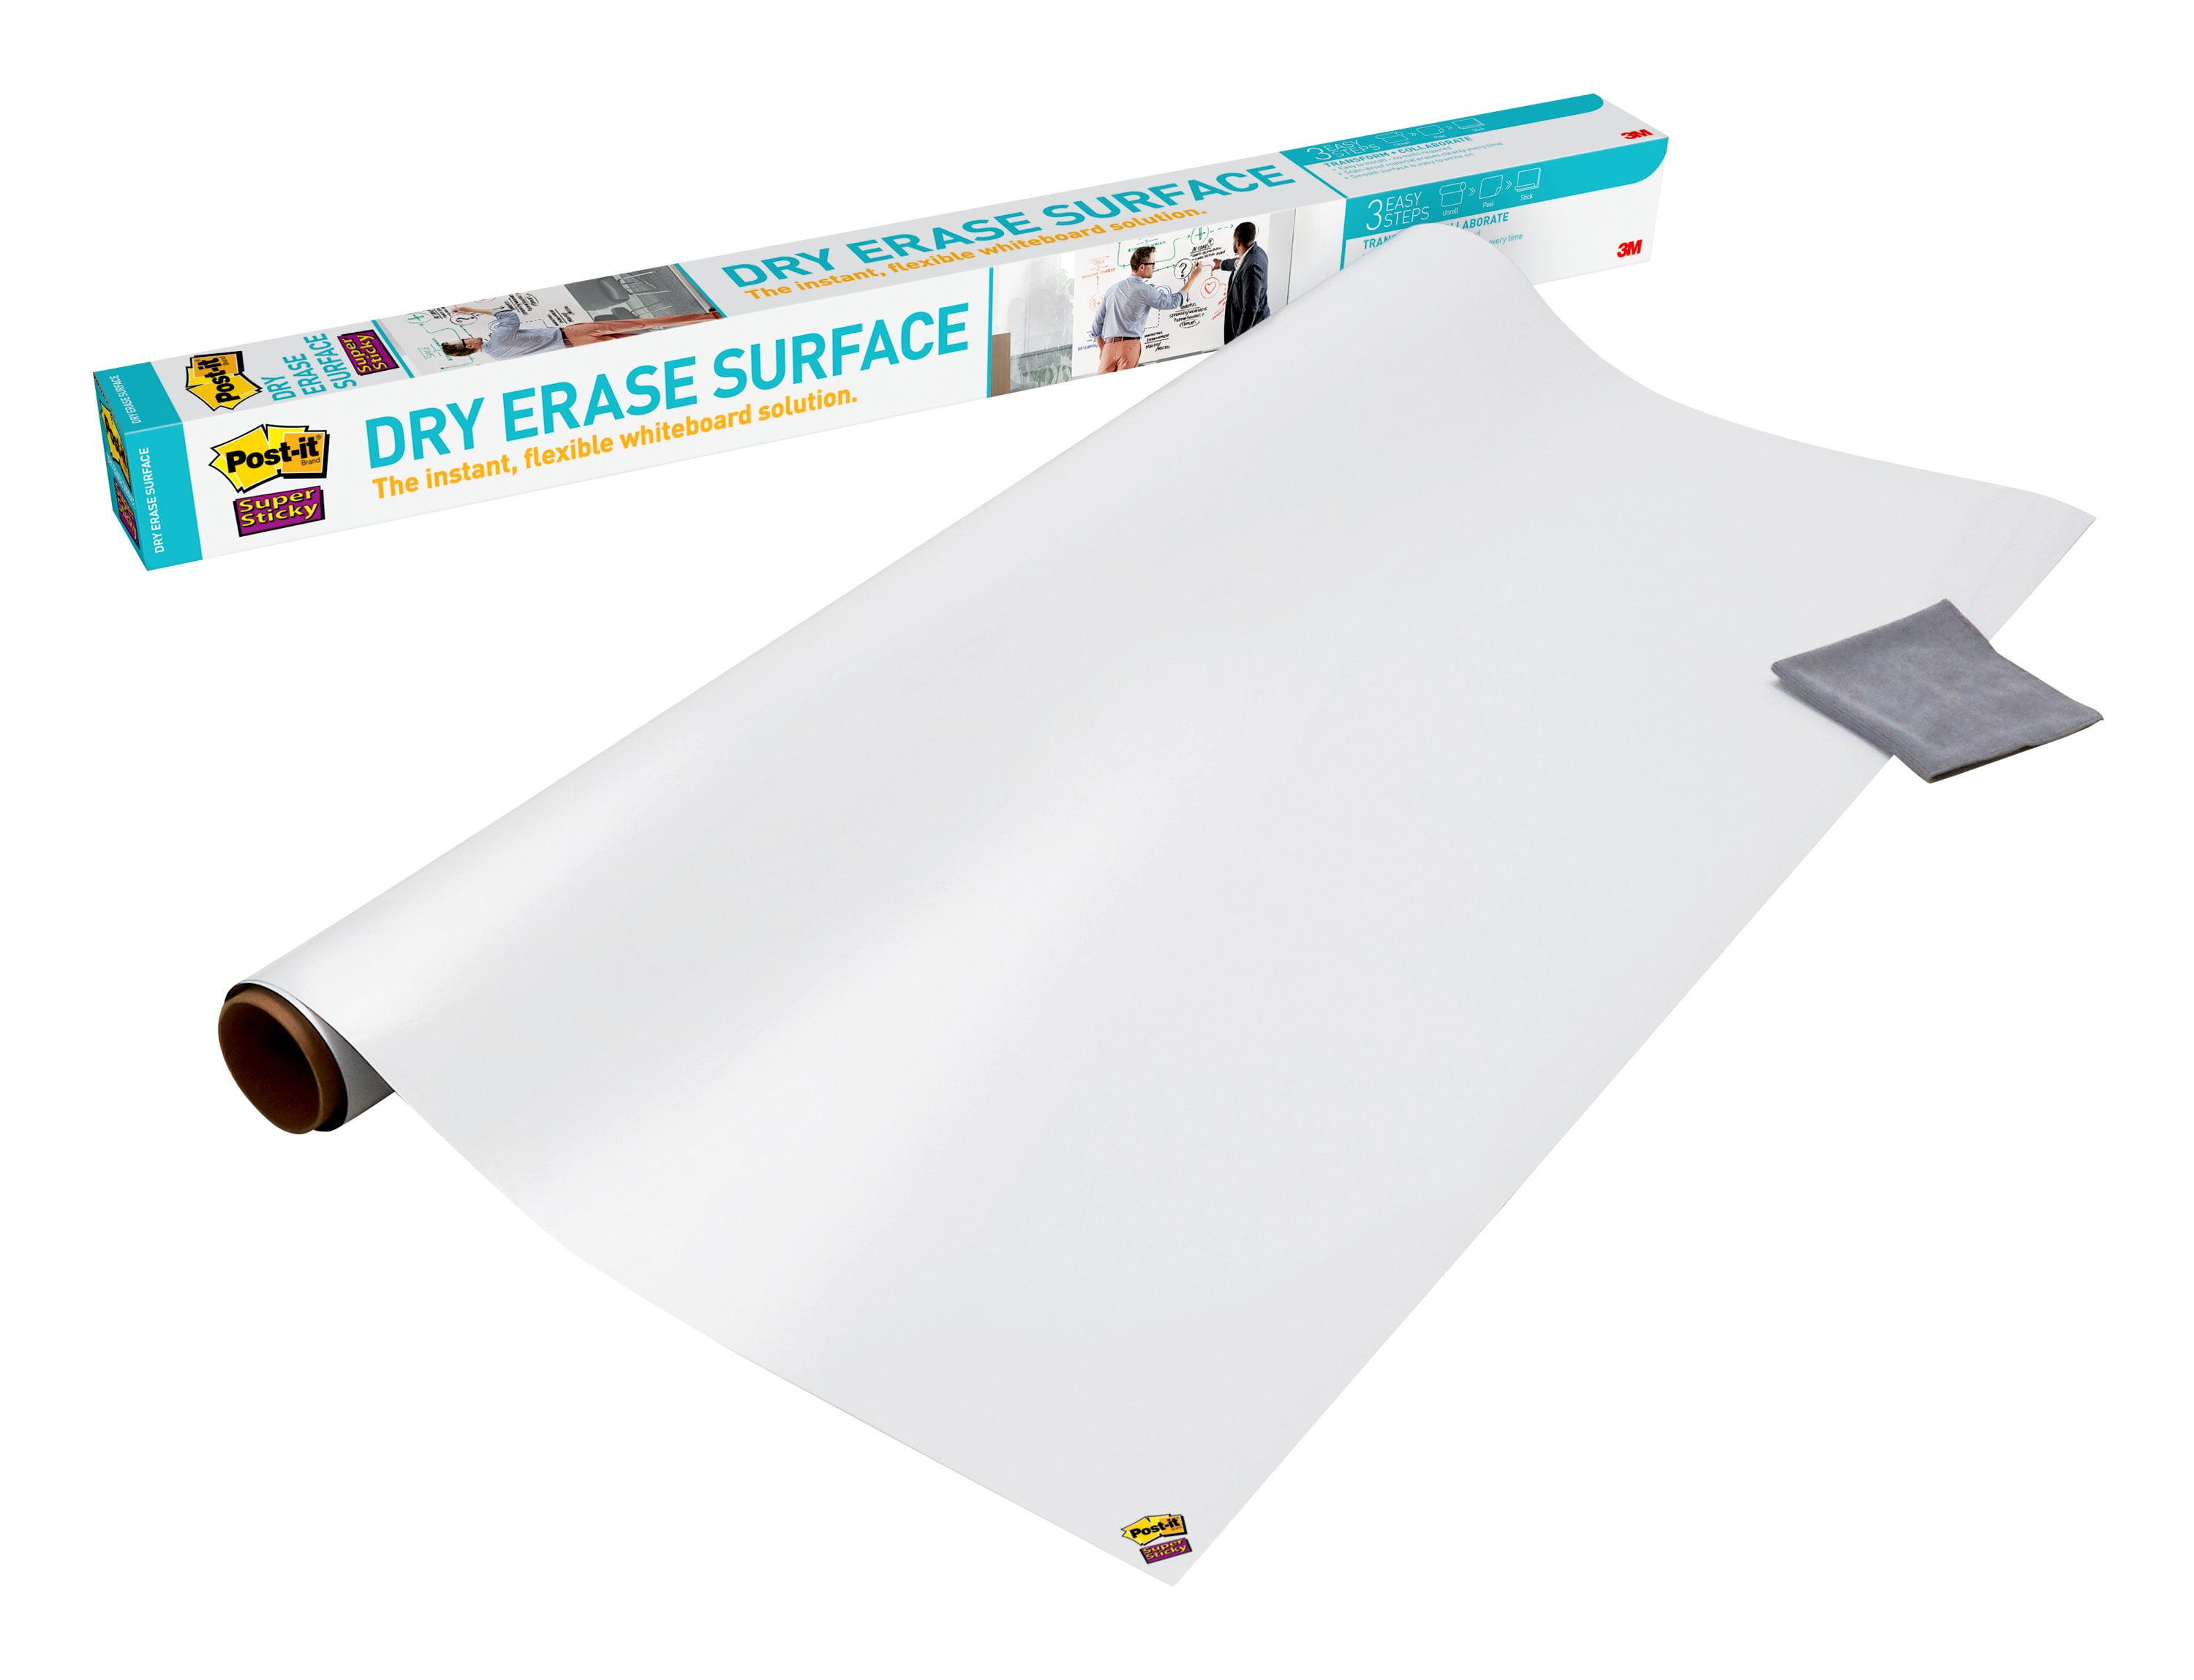 Post-it Self-Stick Dry Erase Surface Film, 6 x 4-Ft, 24 Sq. Ft